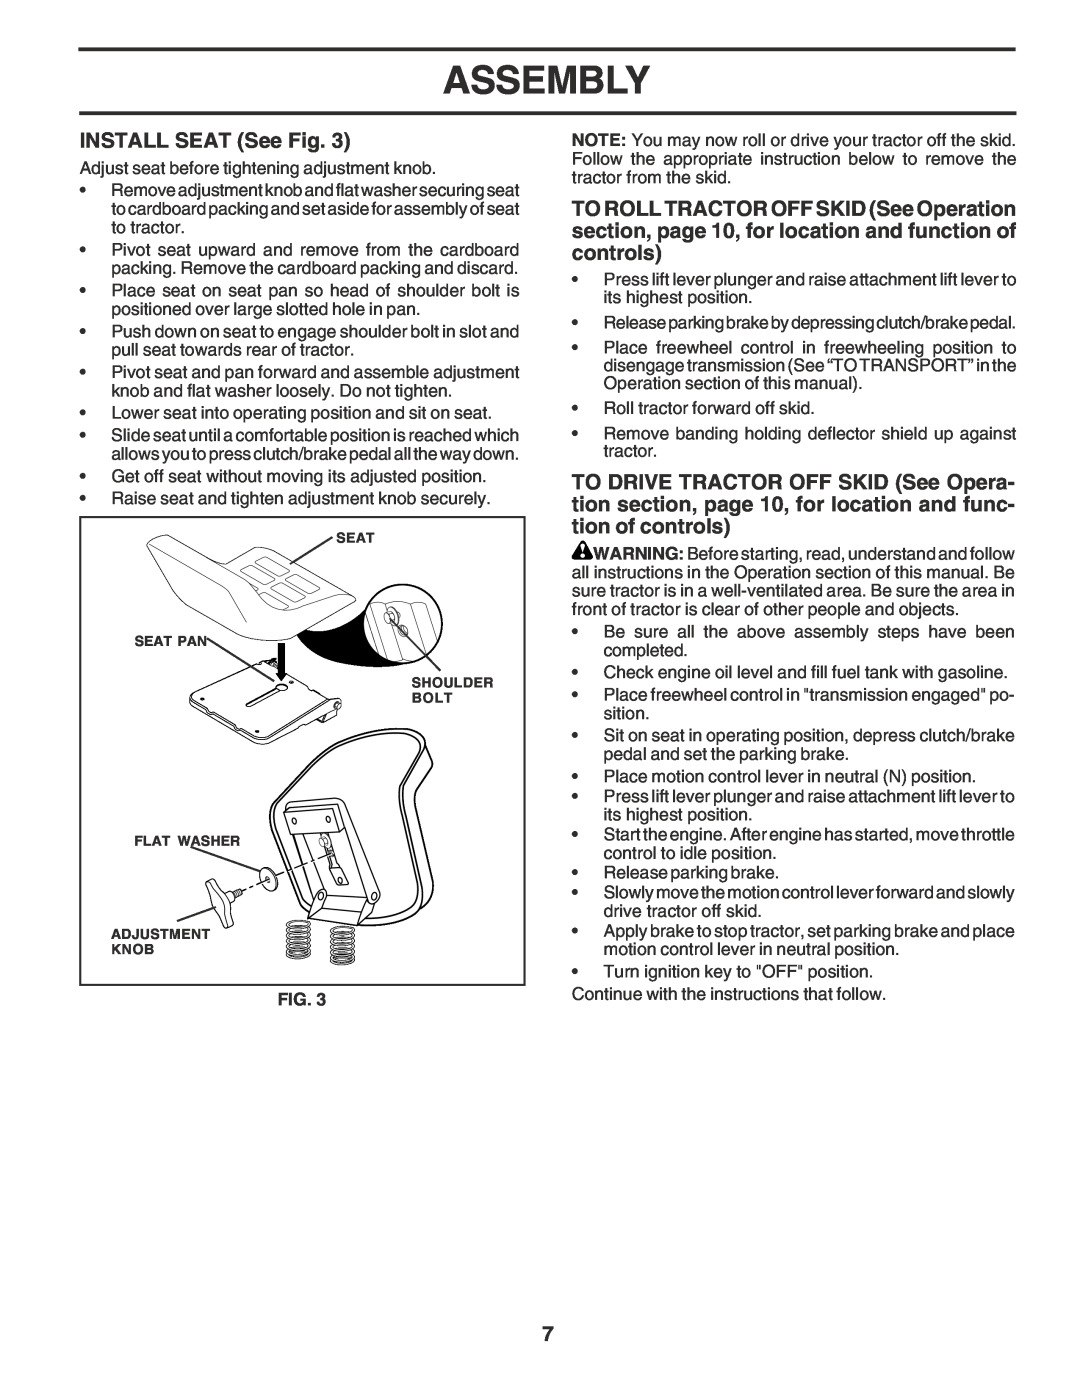 Poulan 183041 owner manual INSTALL SEAT See Fig, Assembly 